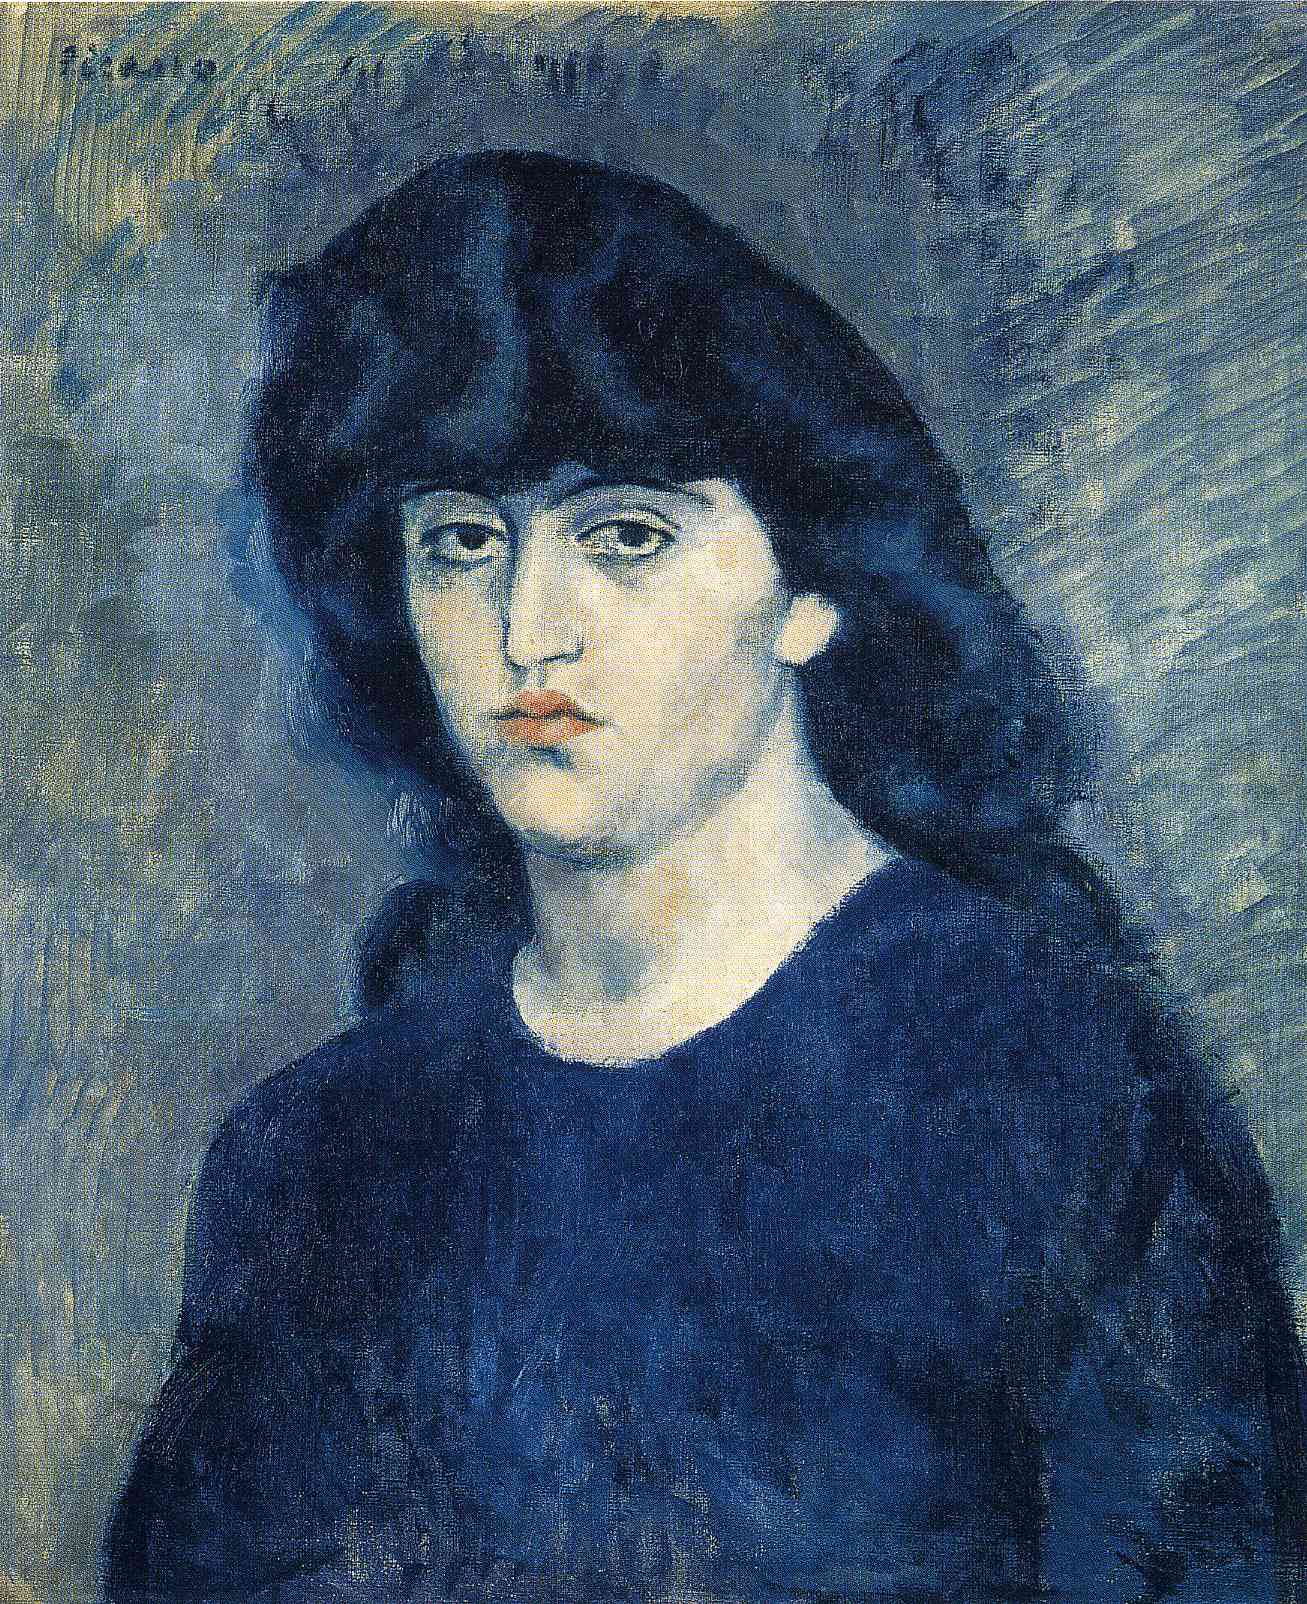 Portrait of Suzanne Bloch, 1904 - Pablo Picasso - WikiArt.org